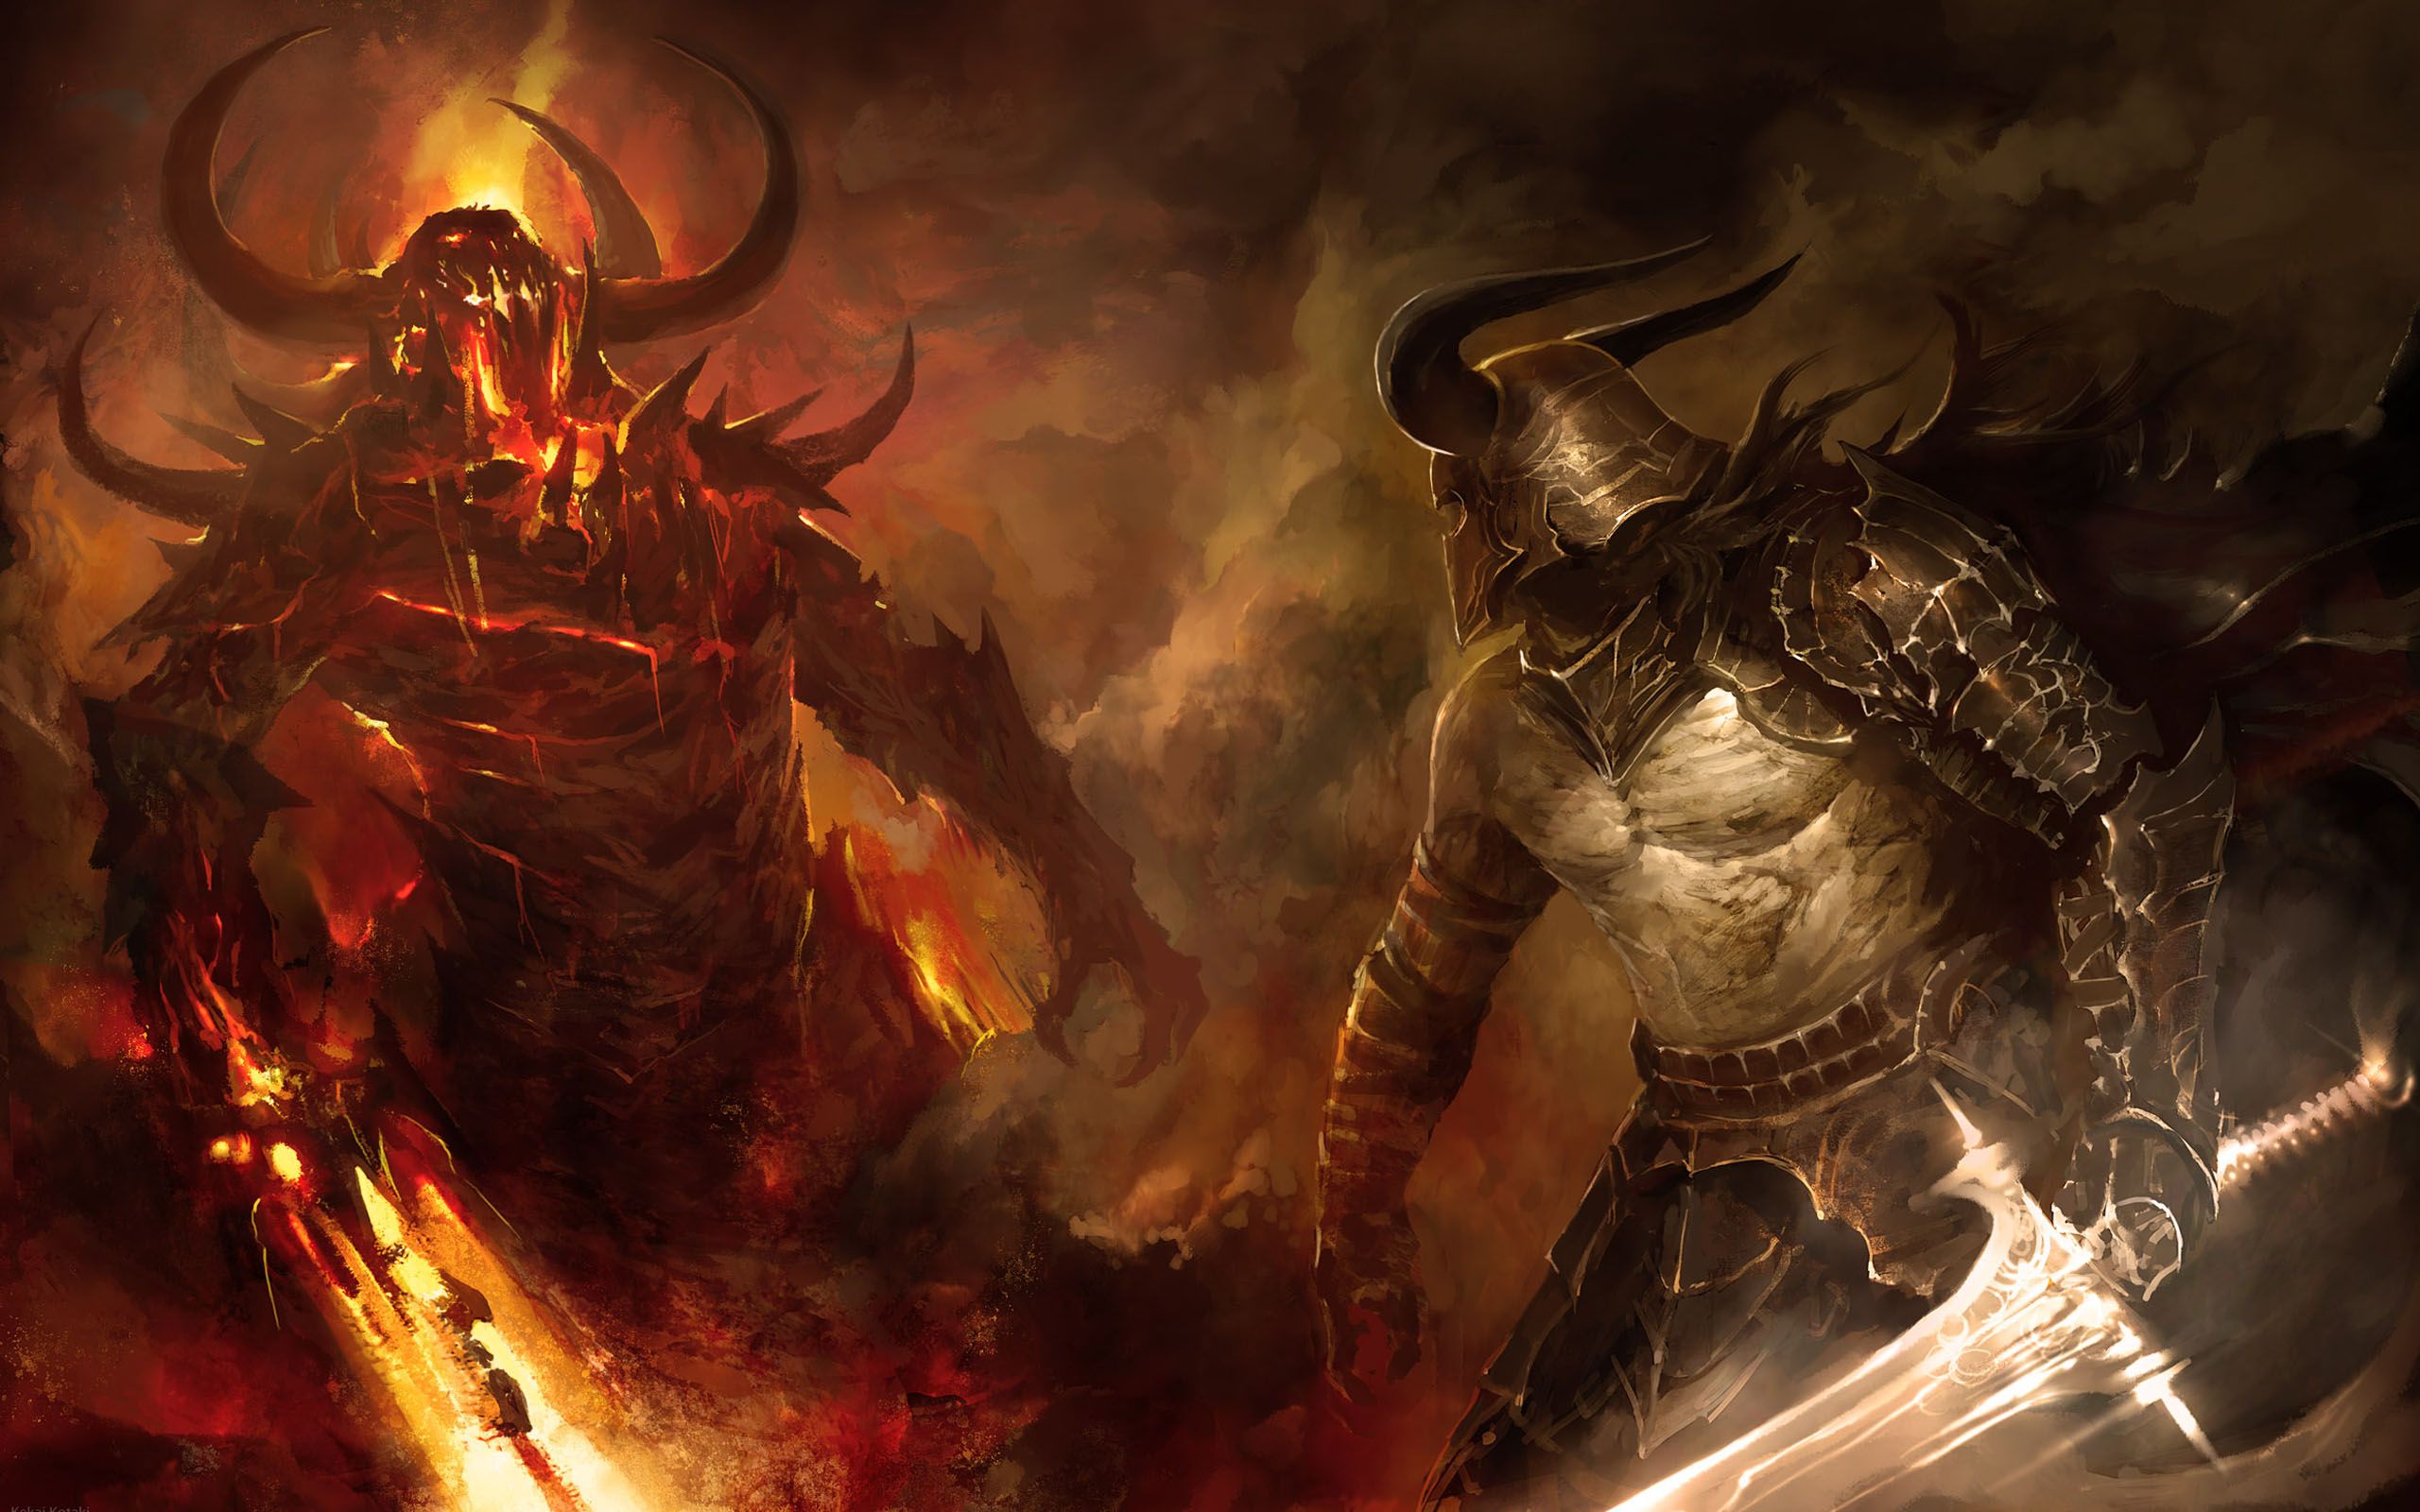 A fiery demon in the gaming world of Guild Wars 2.